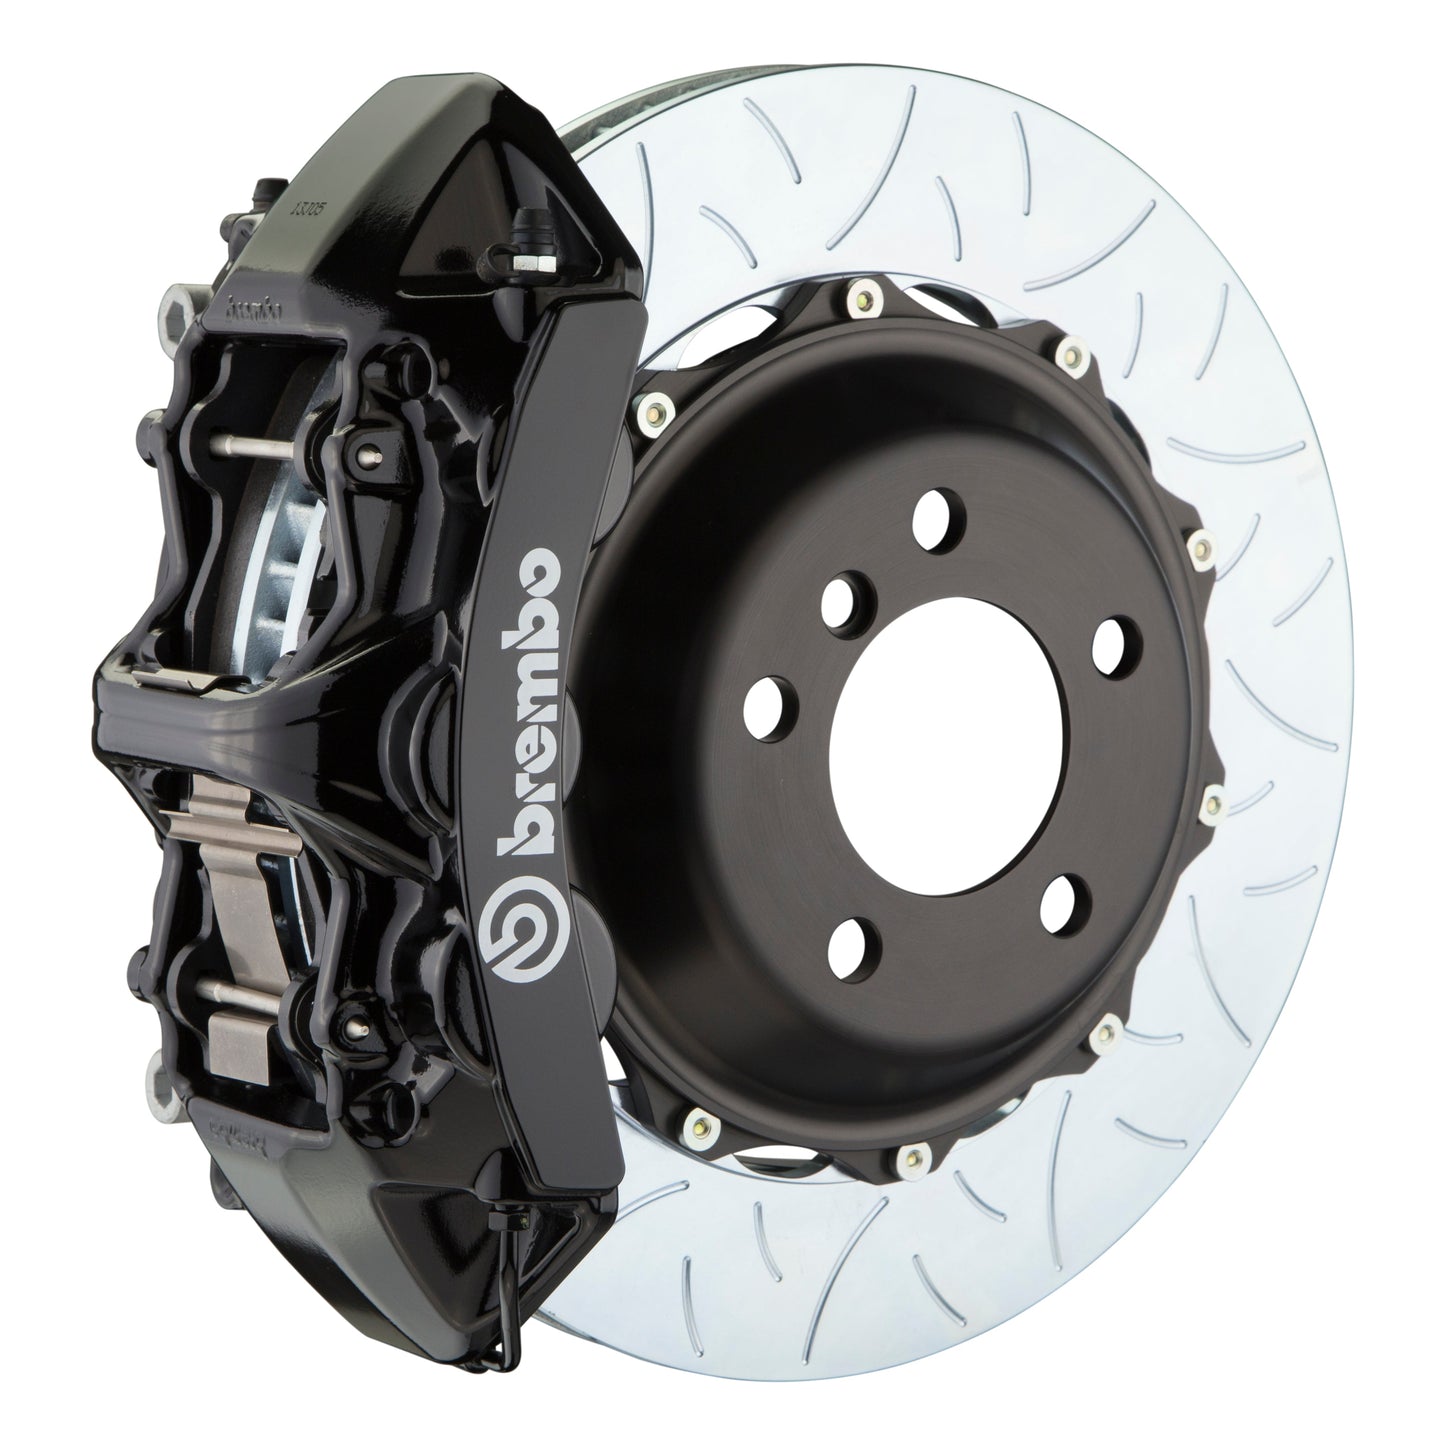 Front Brembo Gran Turismo Braking Upgrade Kit (1M19044A) GT / M6 Caliper with 6-Pistons & 2-piece 380x32 Disc